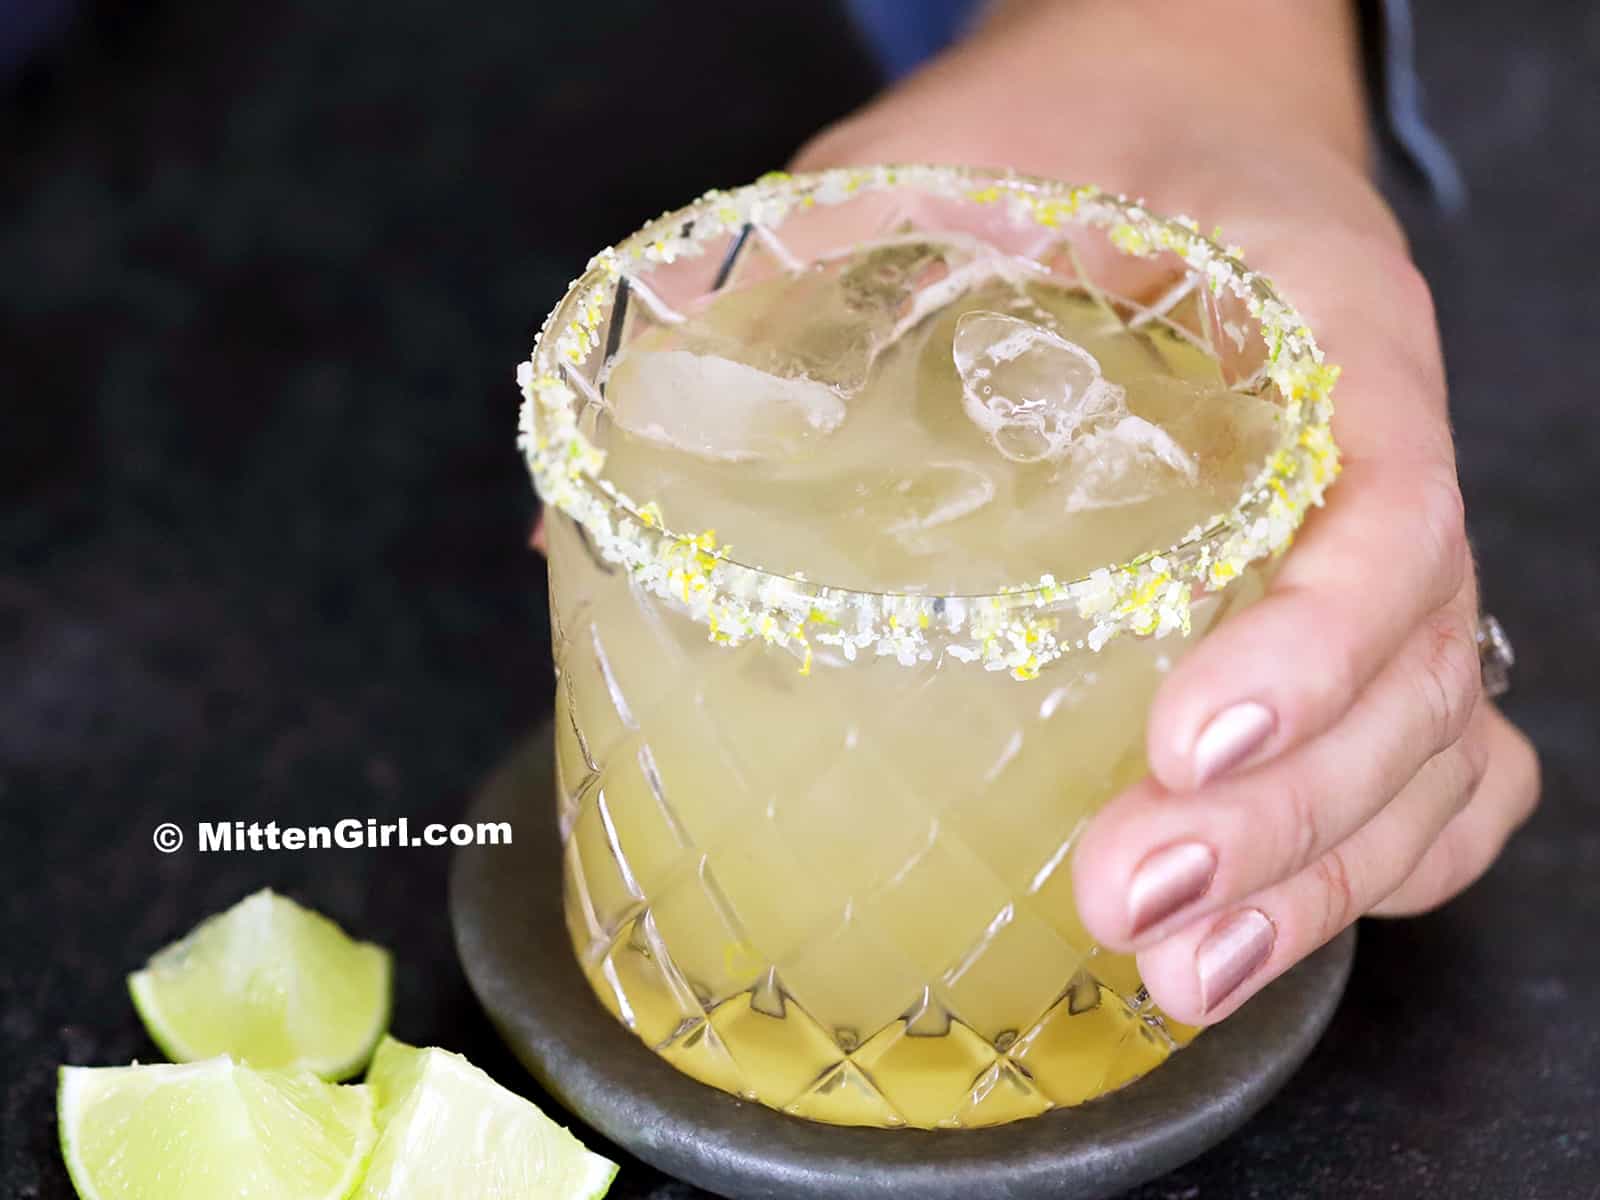 A hand picking up a glass of citrus margarita.